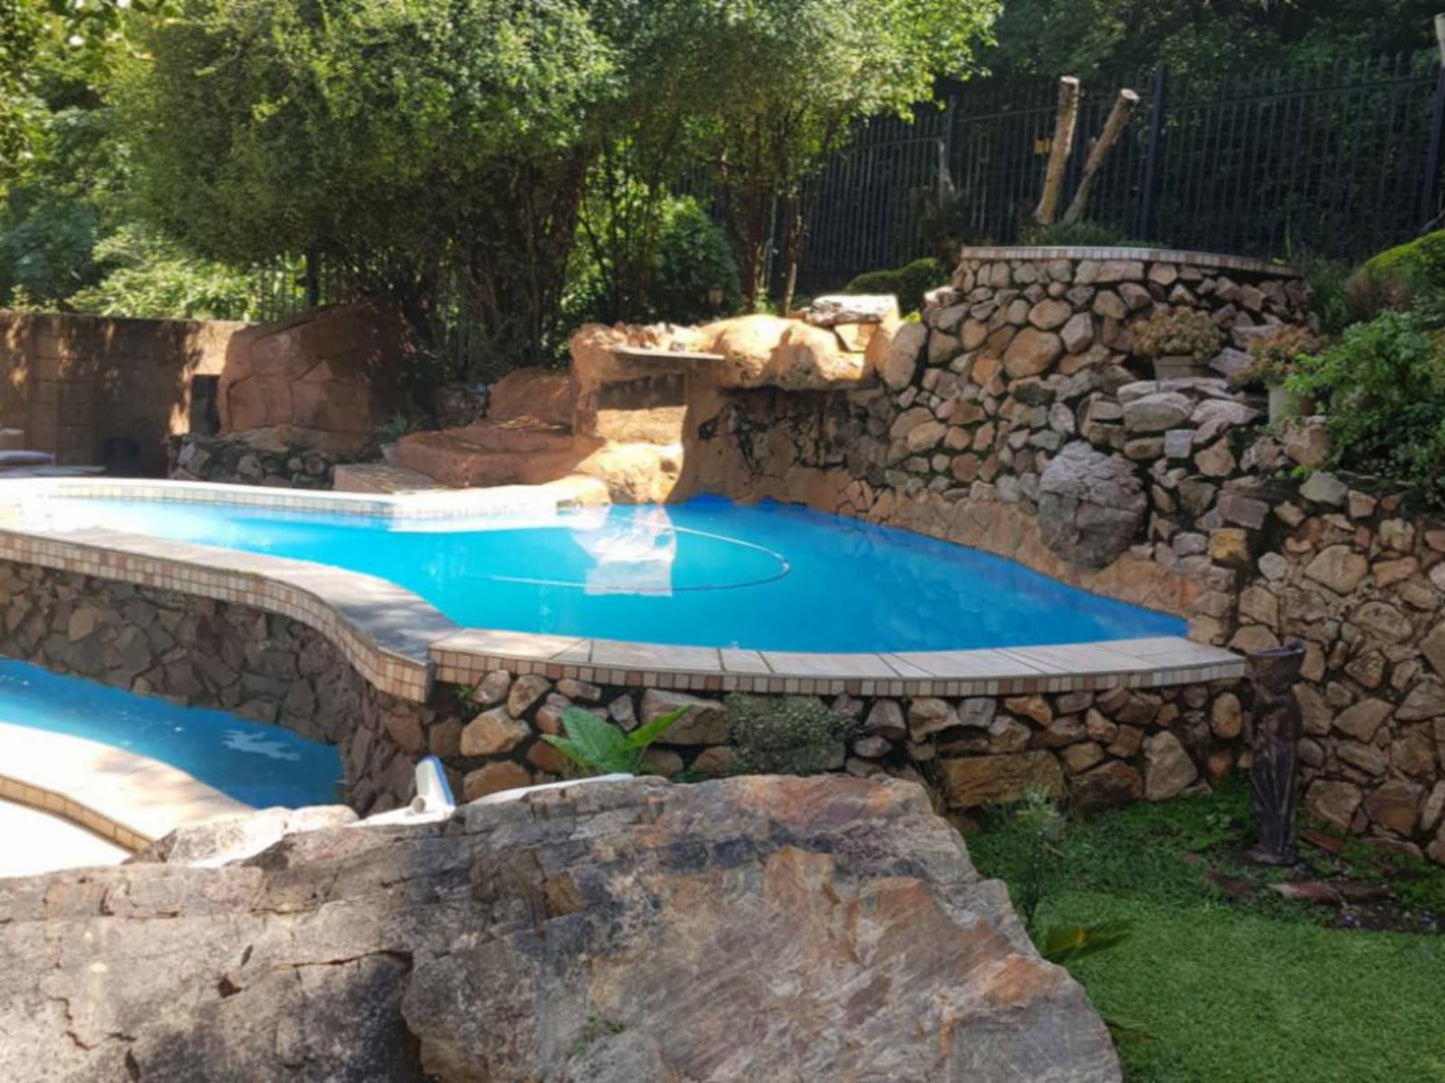 El Shadai Guest House Schoemansville Hartbeespoort North West Province South Africa Garden, Nature, Plant, Swimming Pool